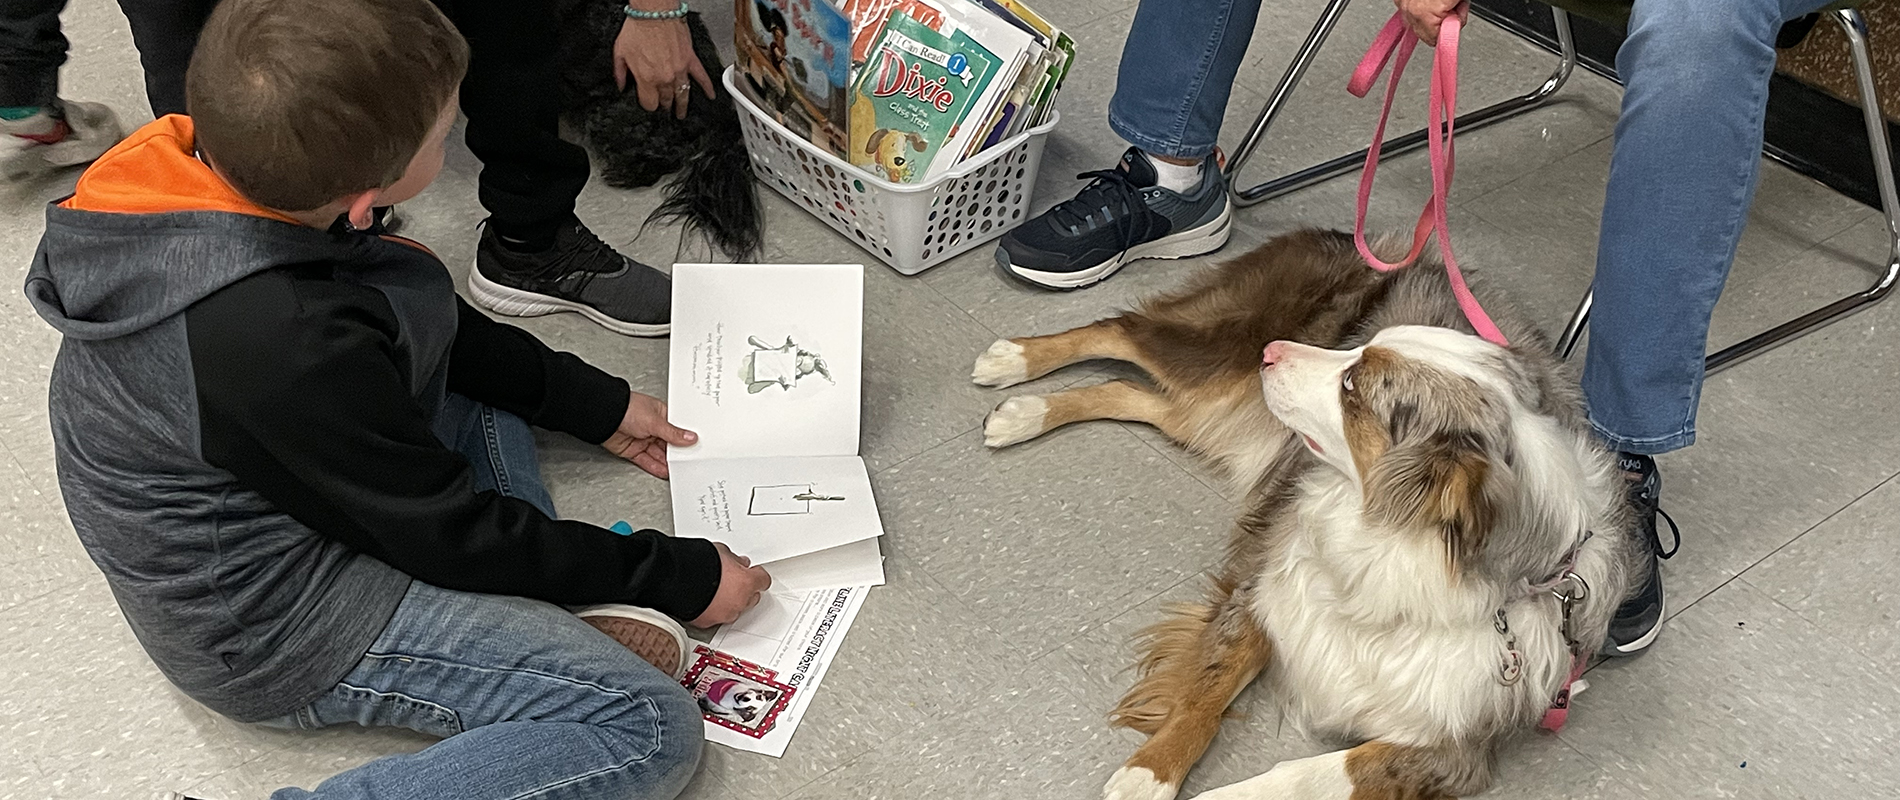 boy reading to dog during Camp Read-In event